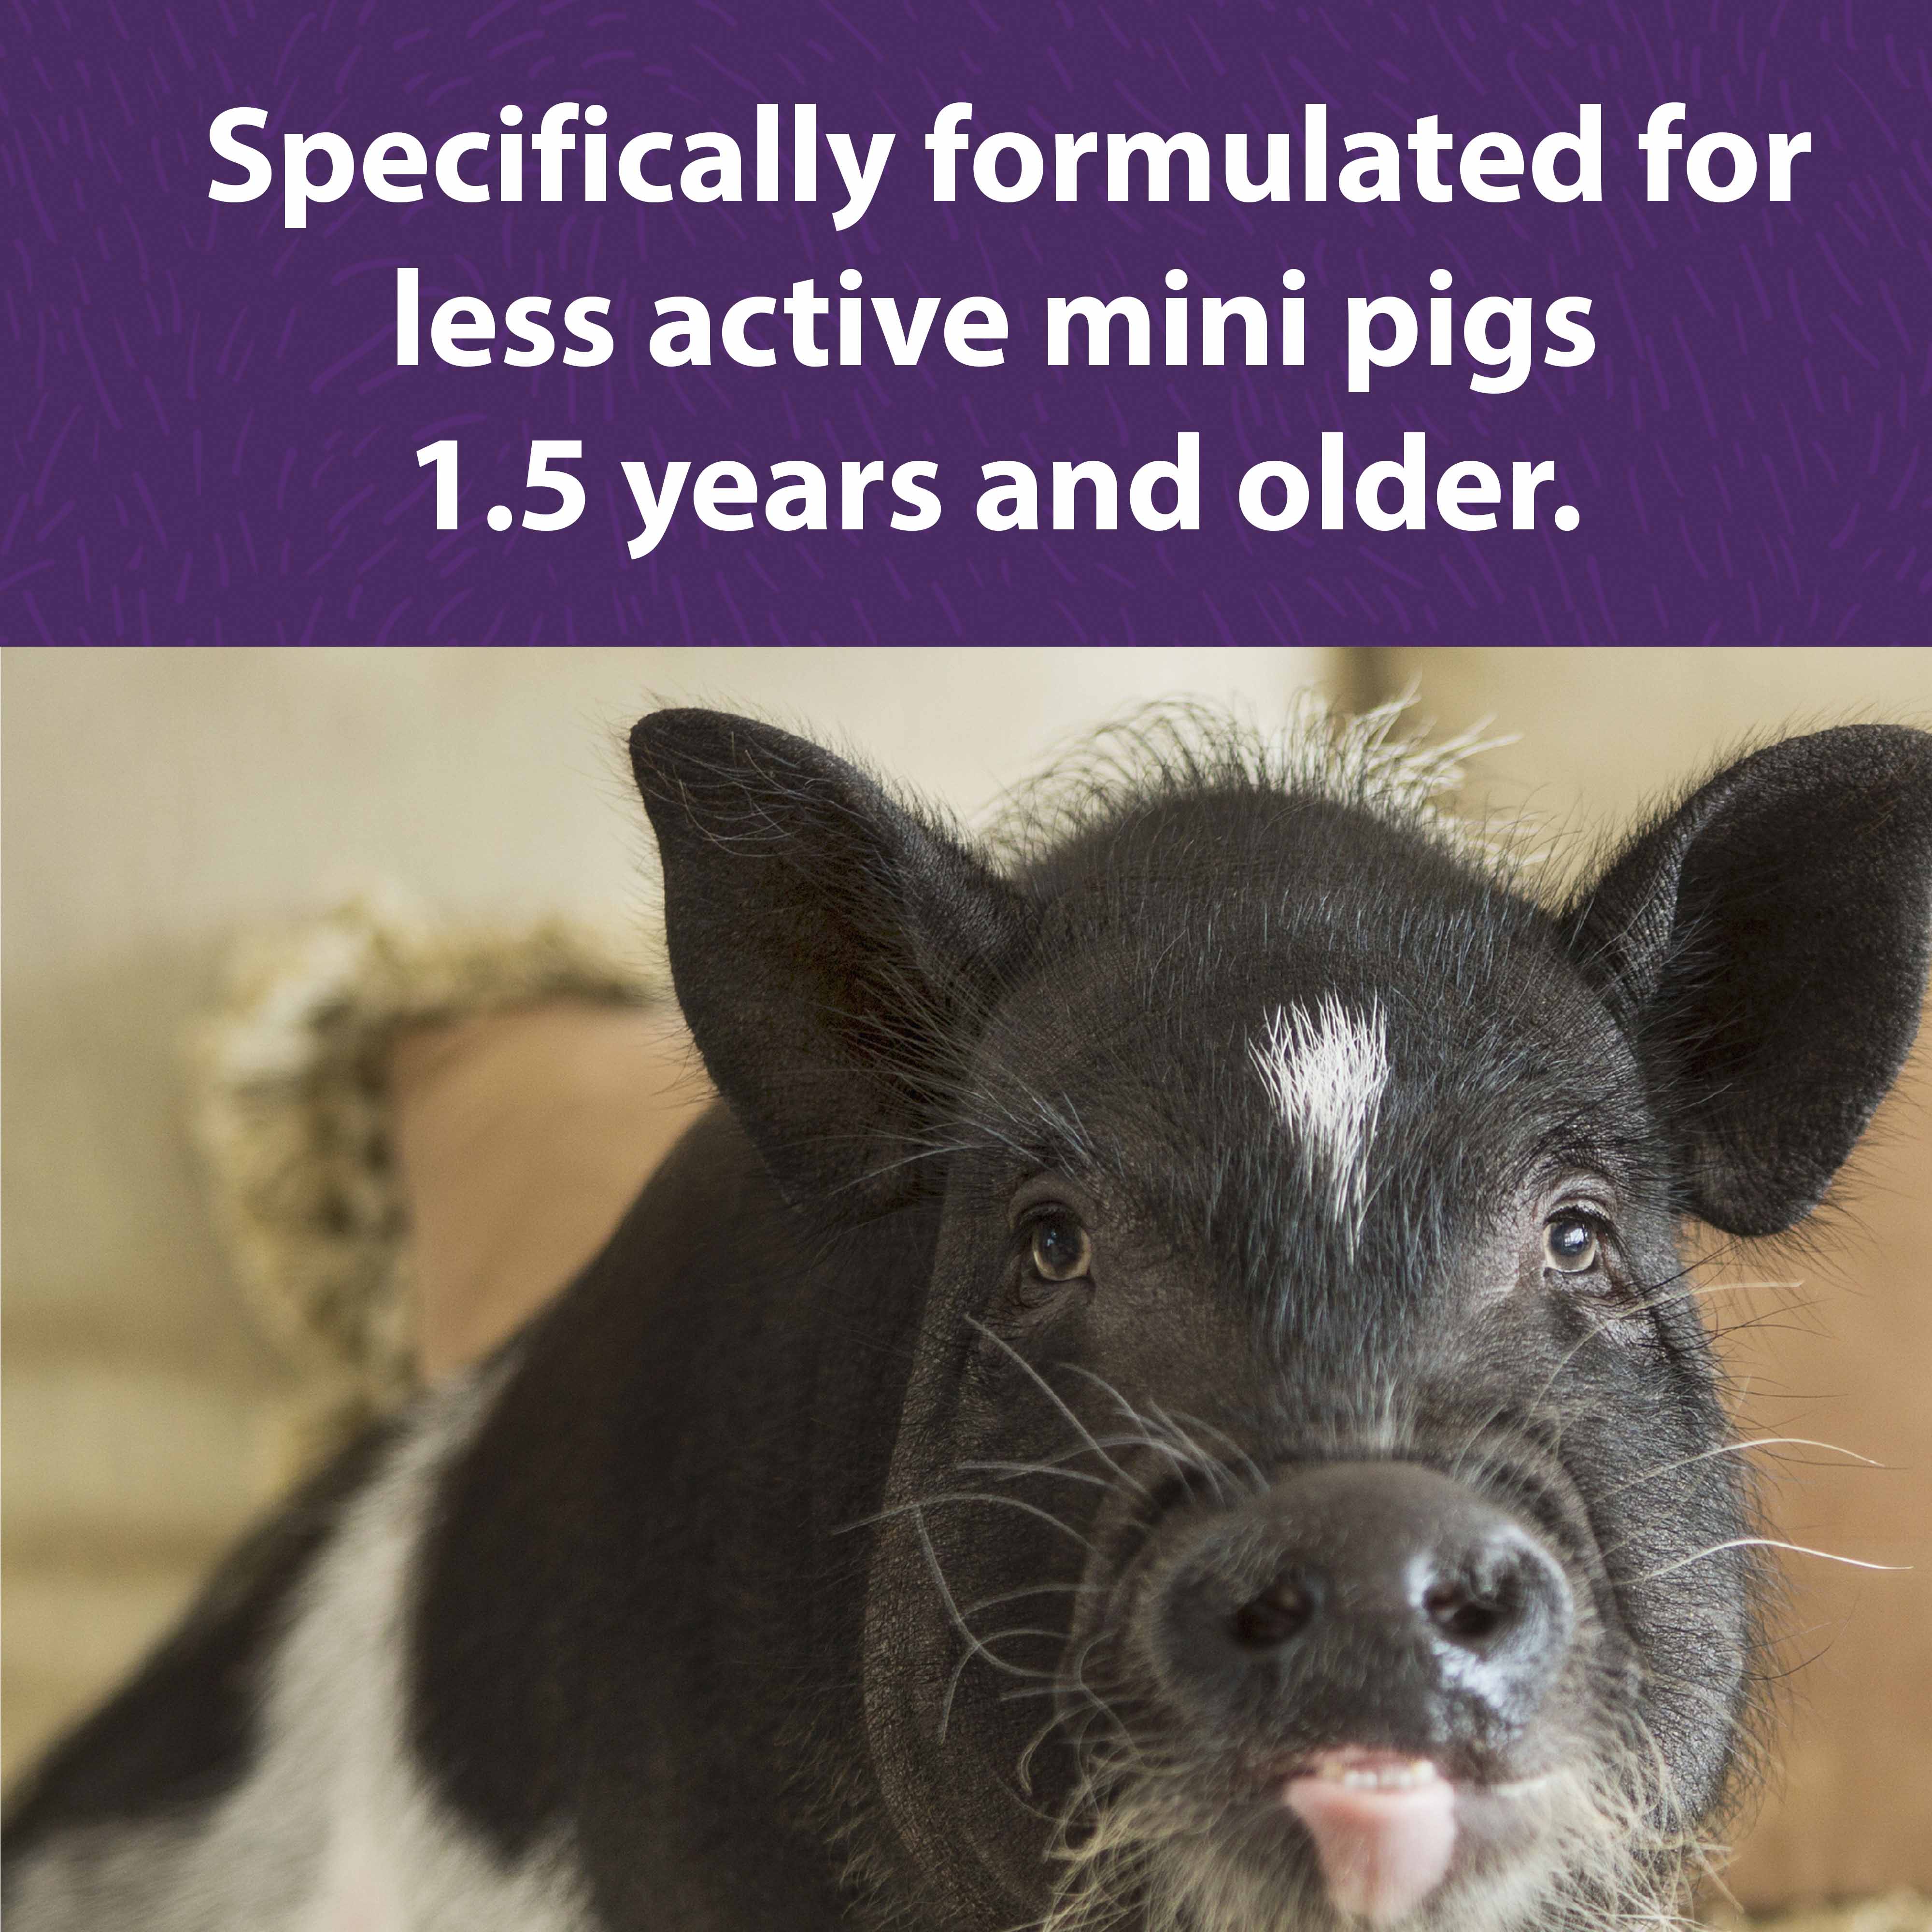 Formulated for less active mini pigs 1.5 years and older